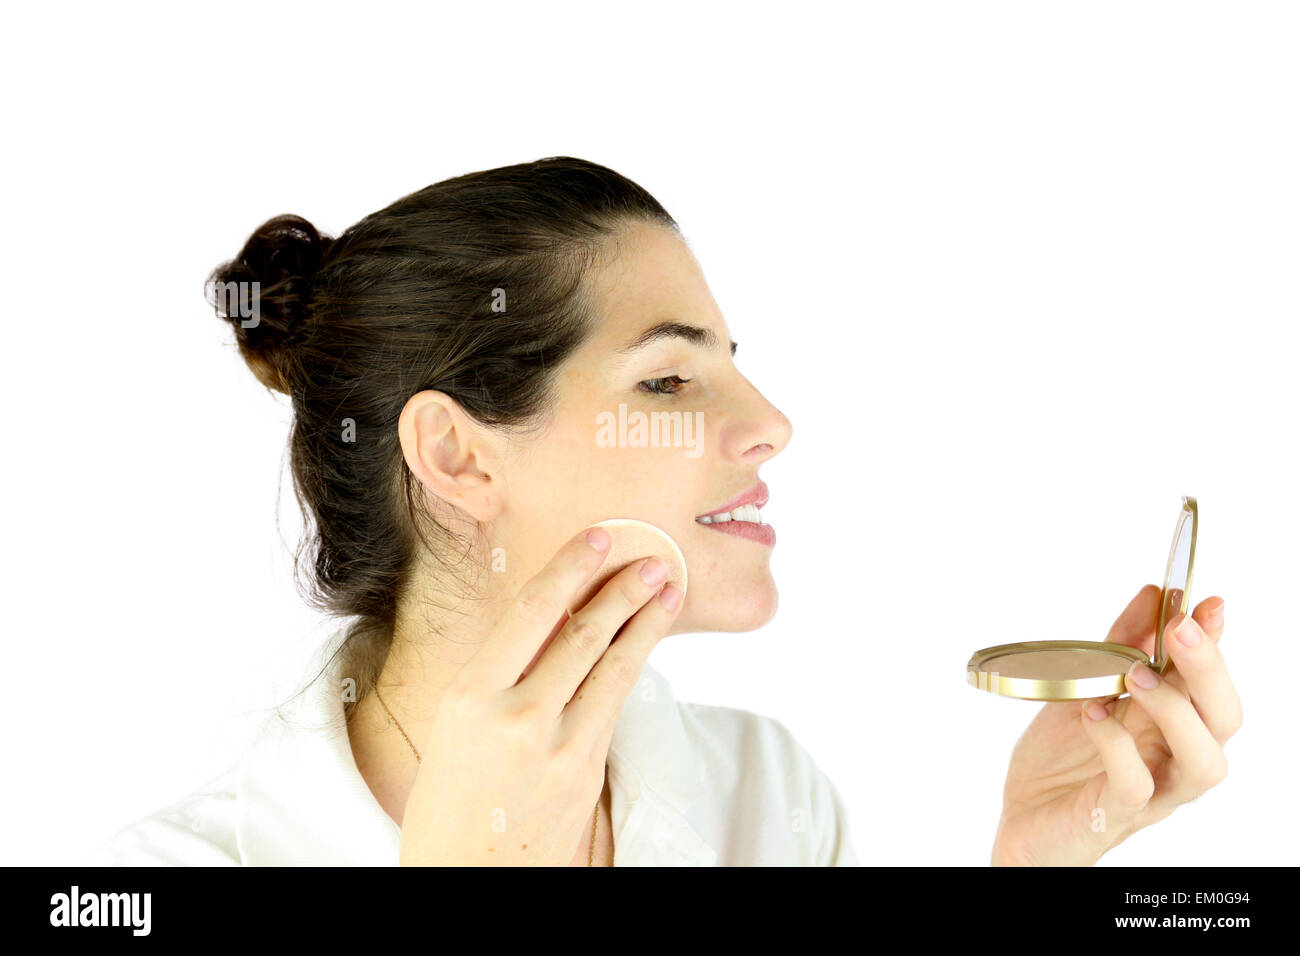 Powdering her face Stock Photo